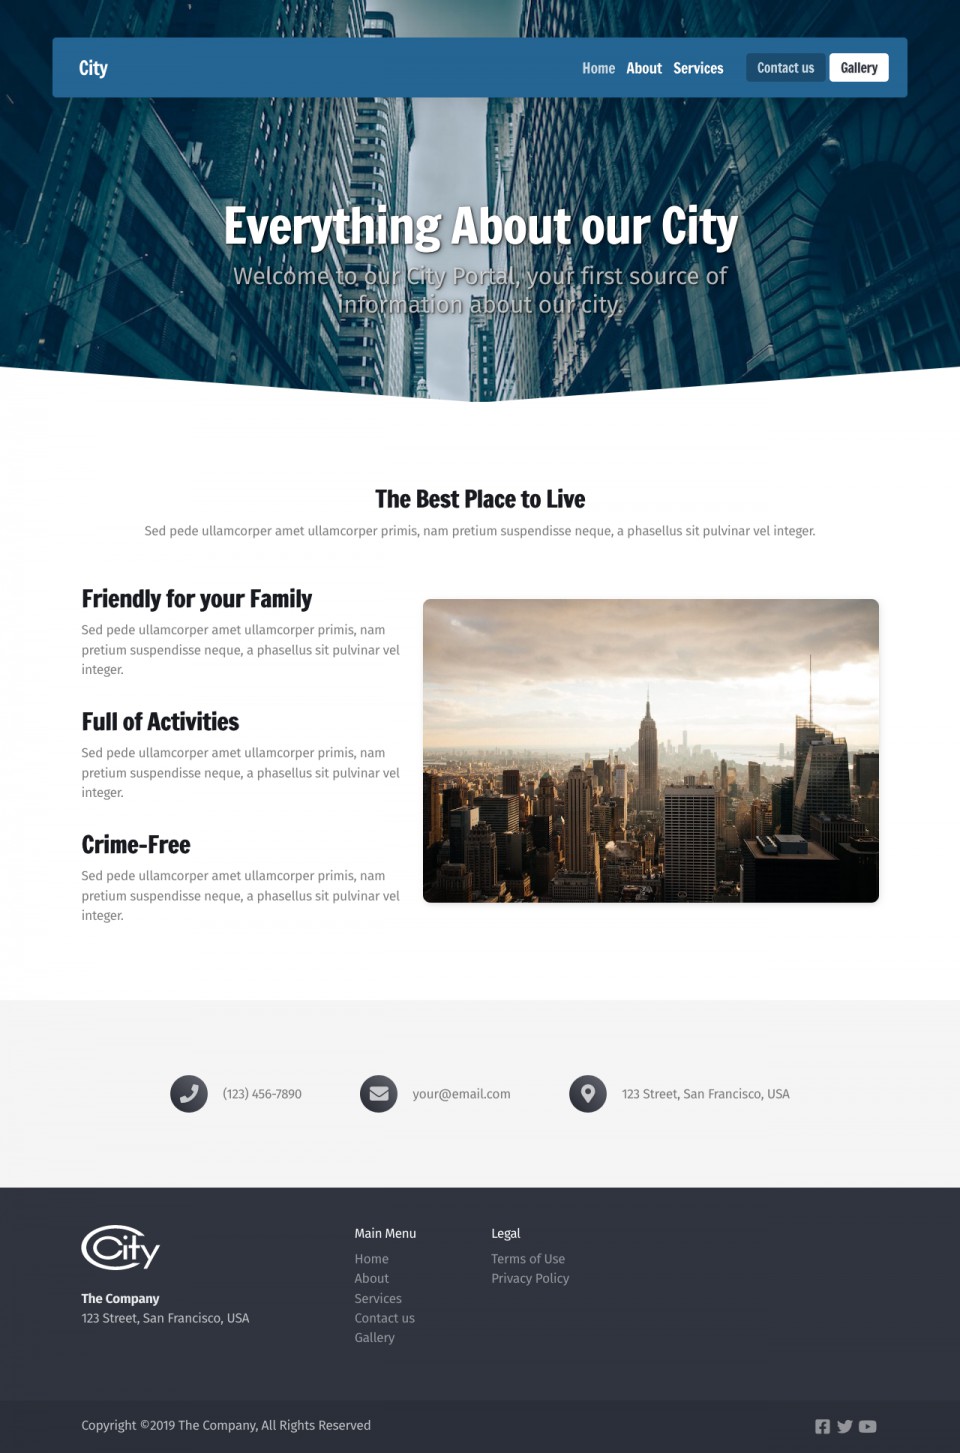 City Website Template - Ideal for small businesses, bloggers, and anyone looking for a modern and vibrant website design.